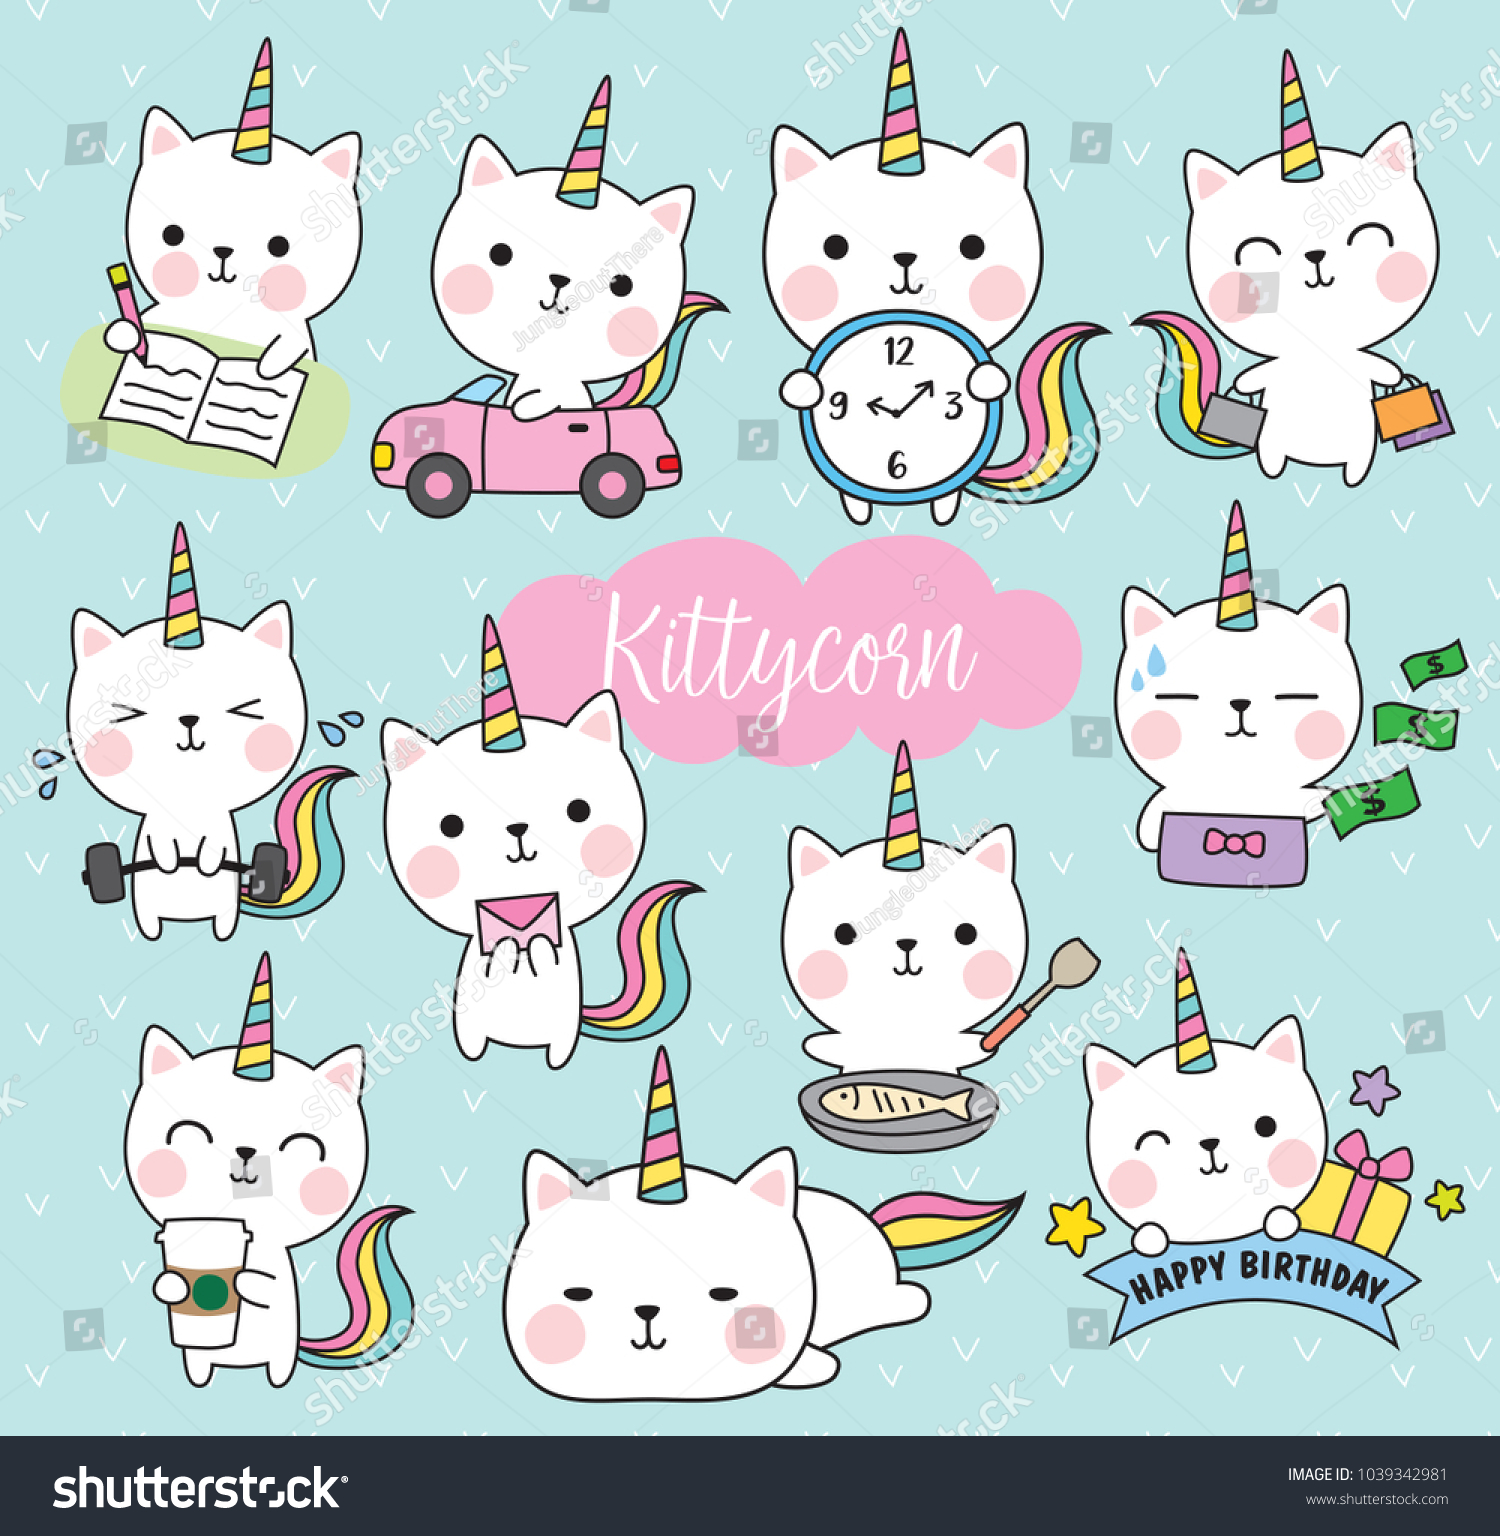 SVG of Vector illustration of cute white cat unicorn or caticorn life activity planner including working, shopping, cooking, driving, working out, etc. svg